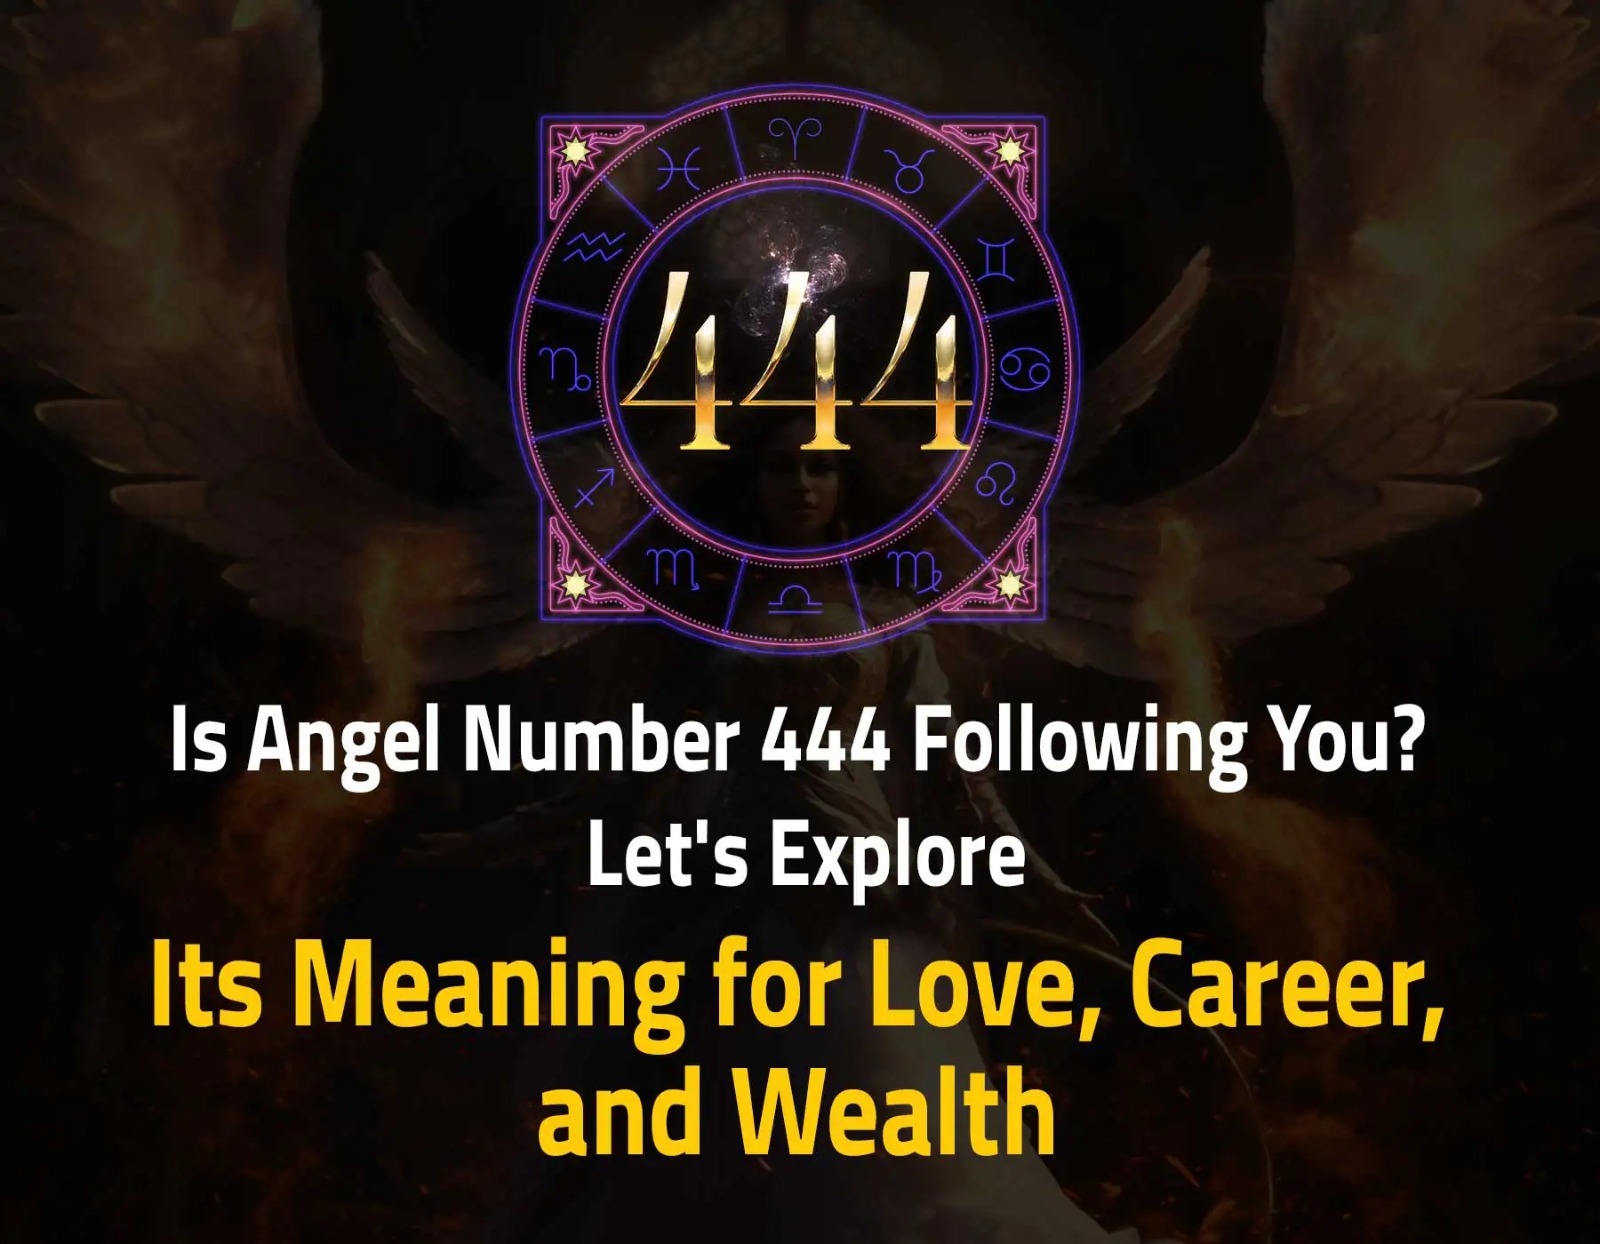 Is Angel Number 444 Following You: Let's Explore Its Meaning for Love, Career, and Wealth